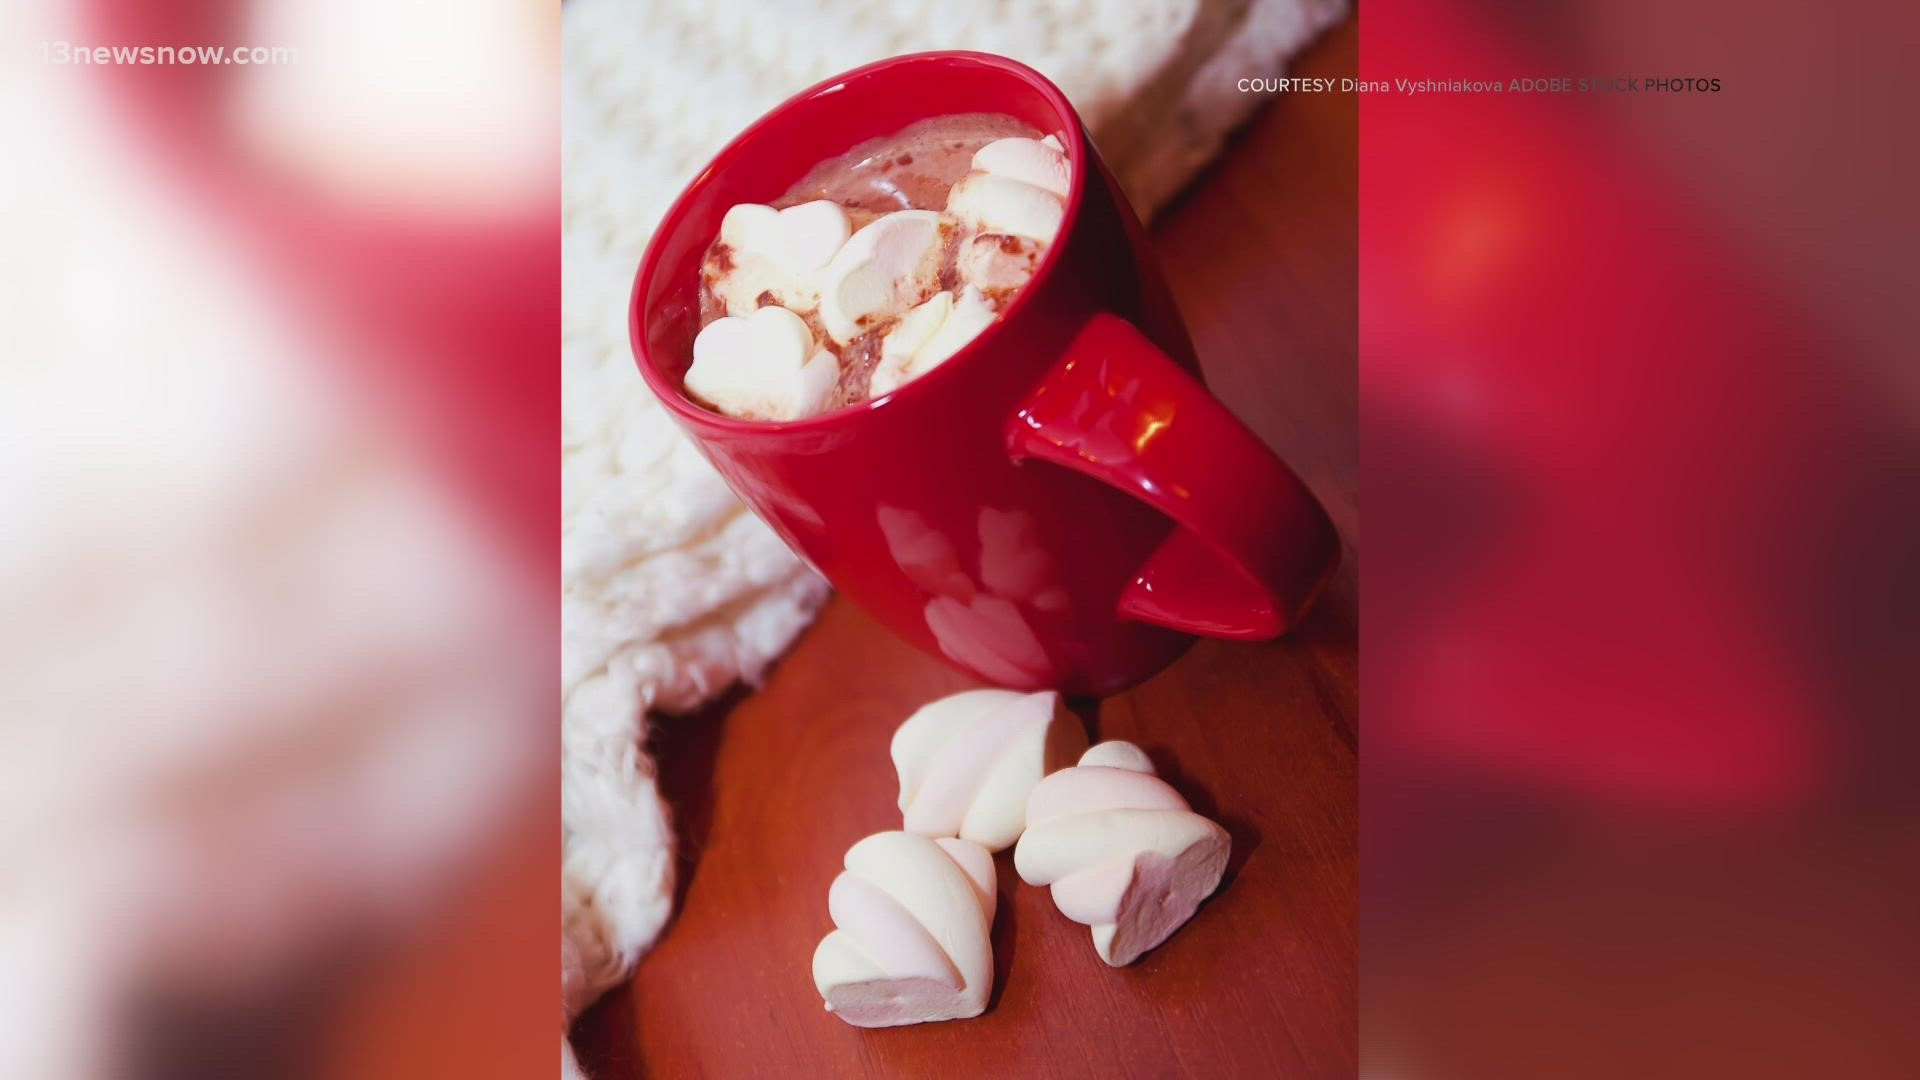 Several Norfolk restaurants are facing off in a week-long competition to see who has the best hot chocolate in the city. People can vote online for the best one.